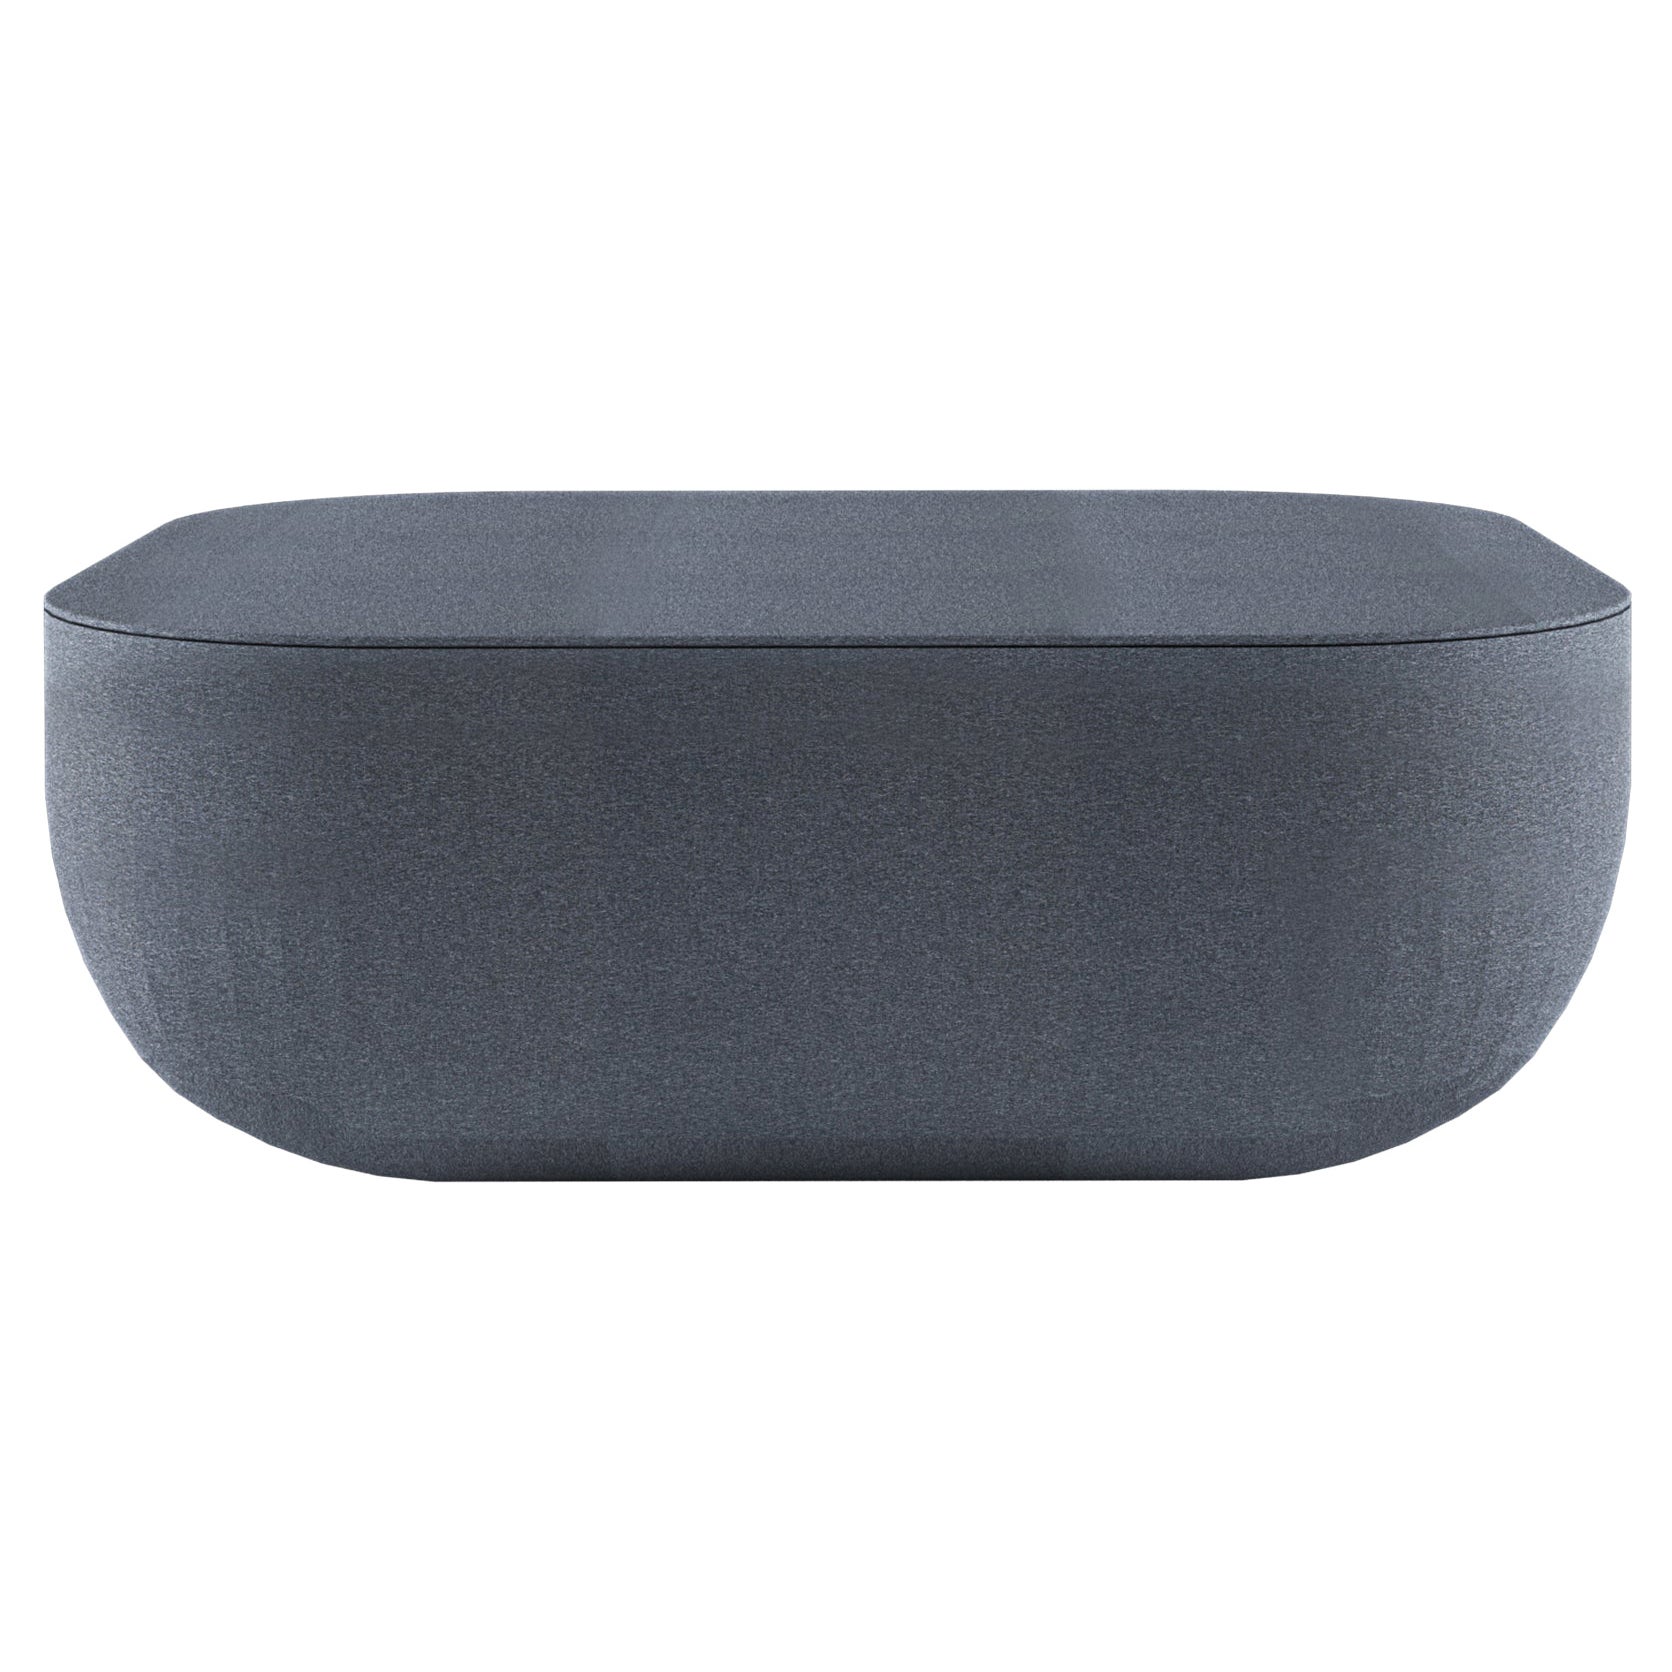 Alias 25G Okome Sofa Pouf in Grey Upholstery by Nendo For Sale